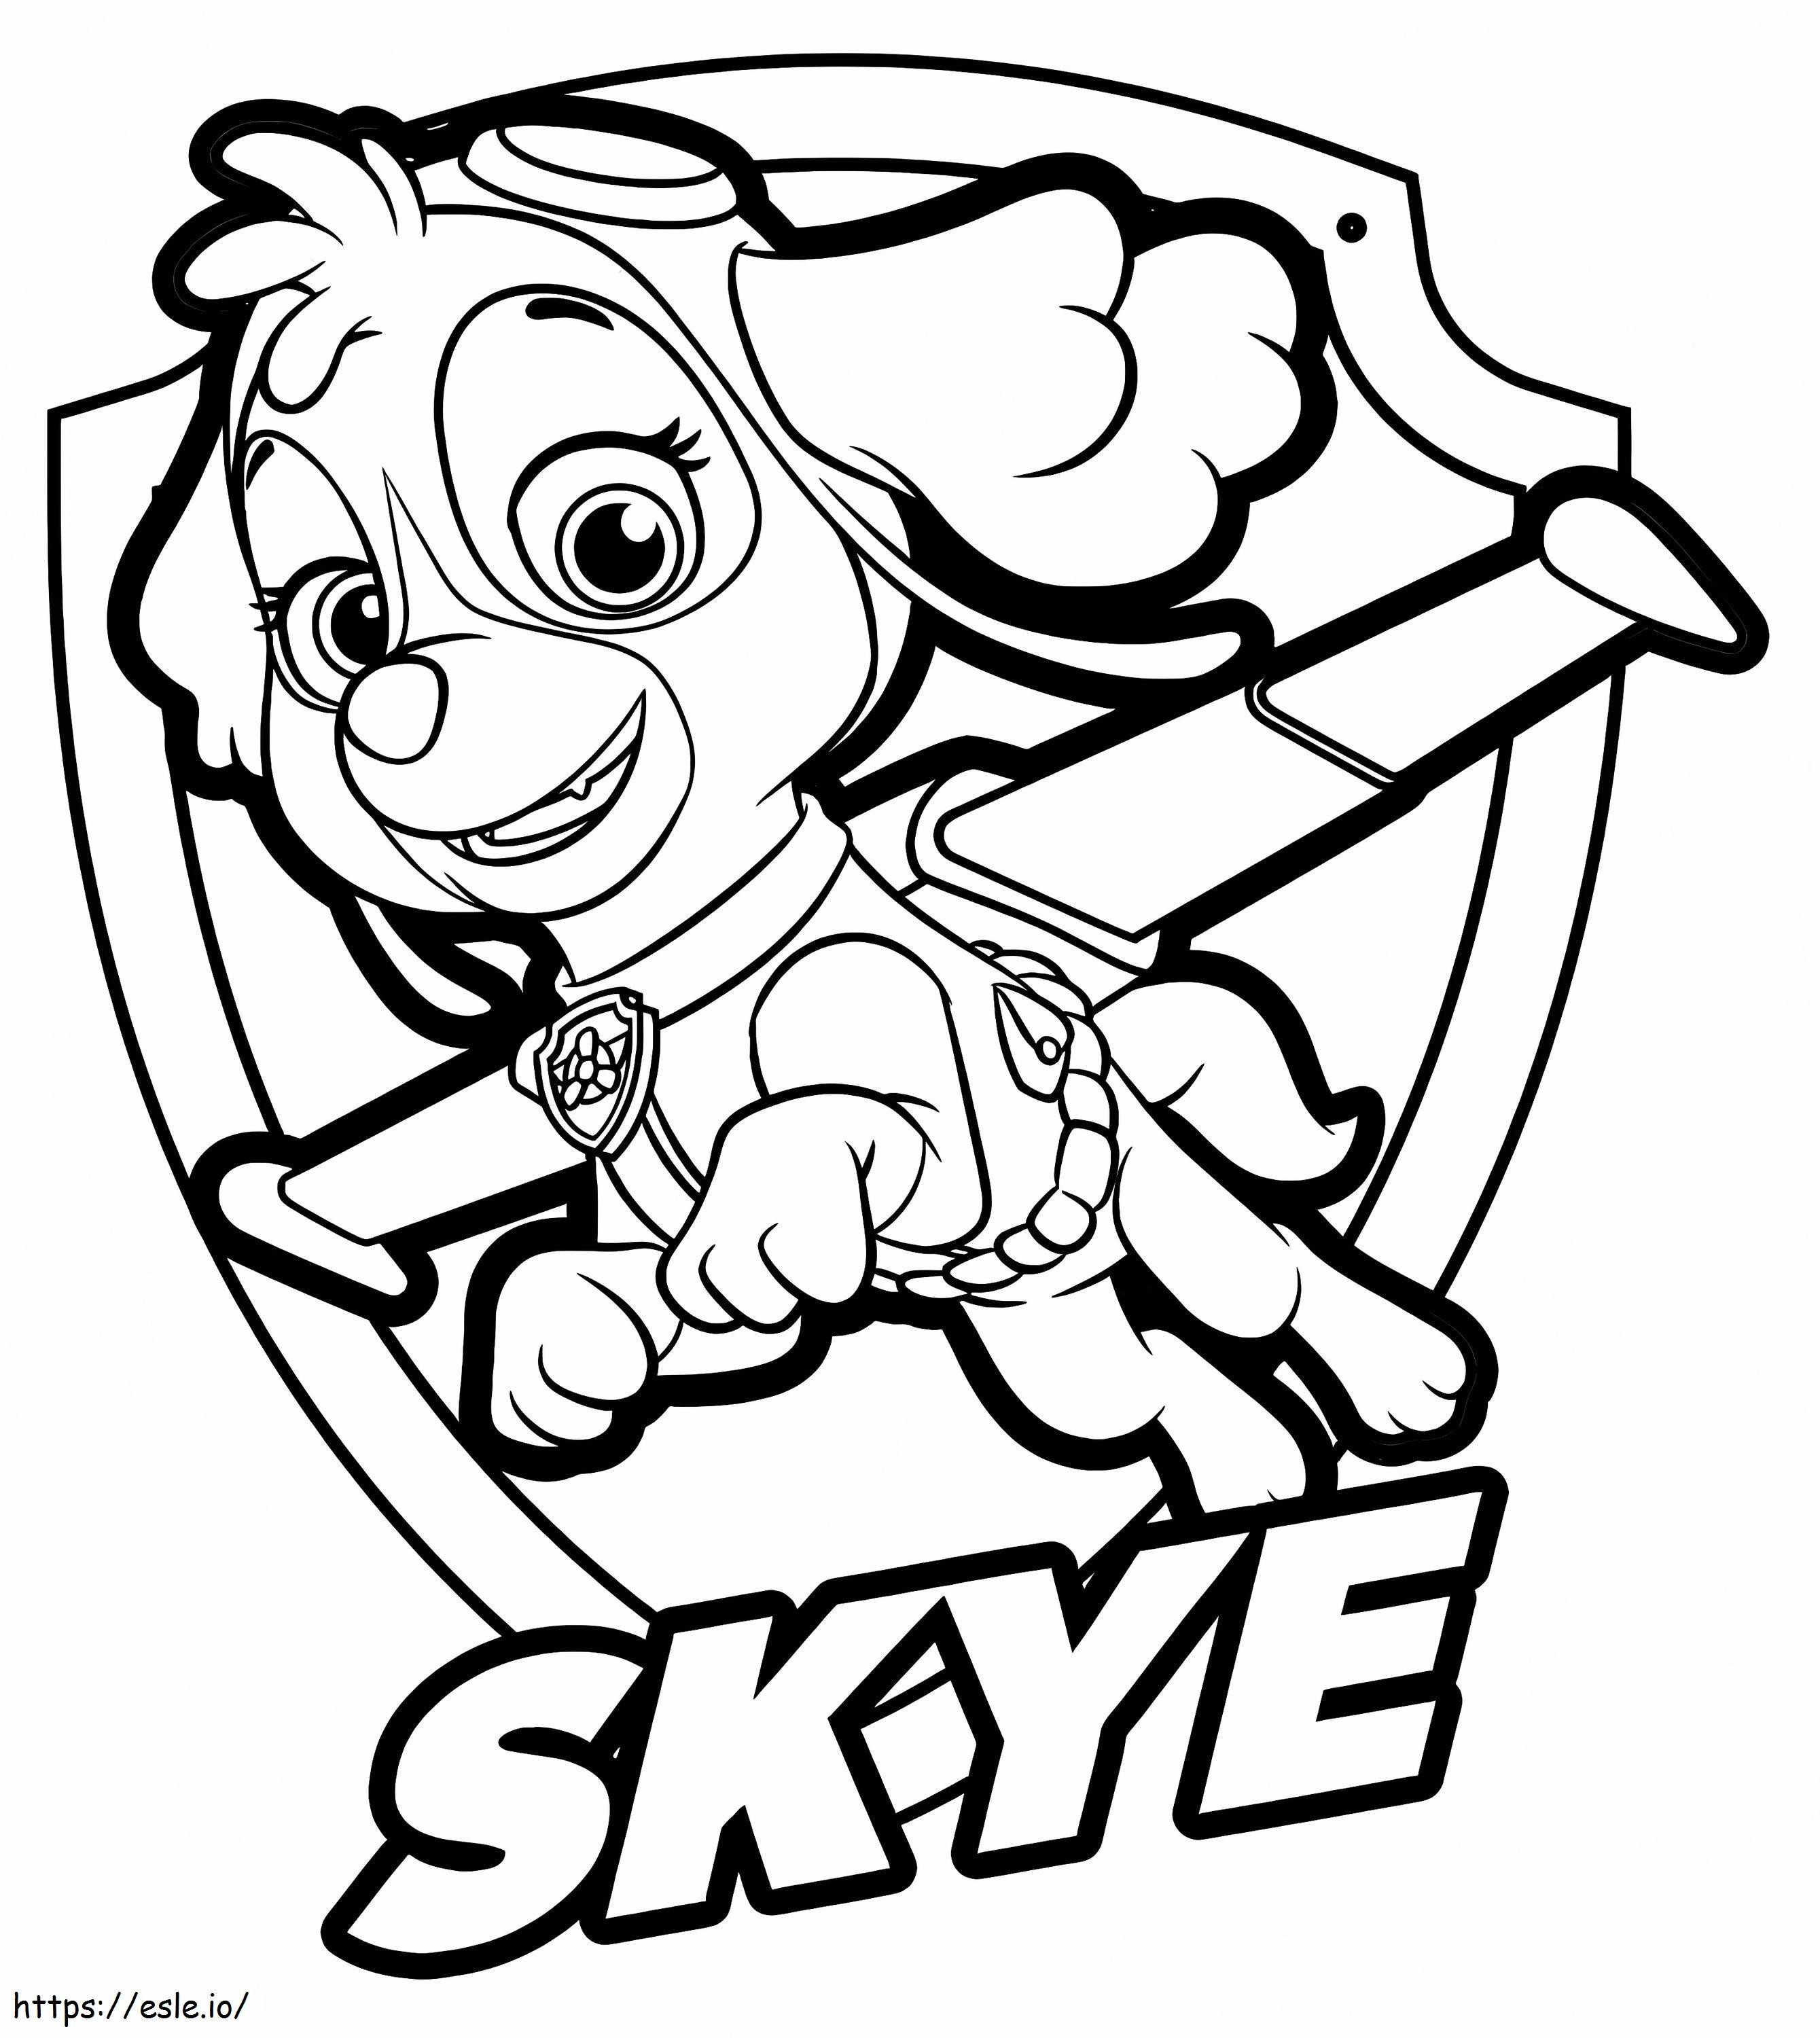 Skye From Paw Patrol 9 coloring page